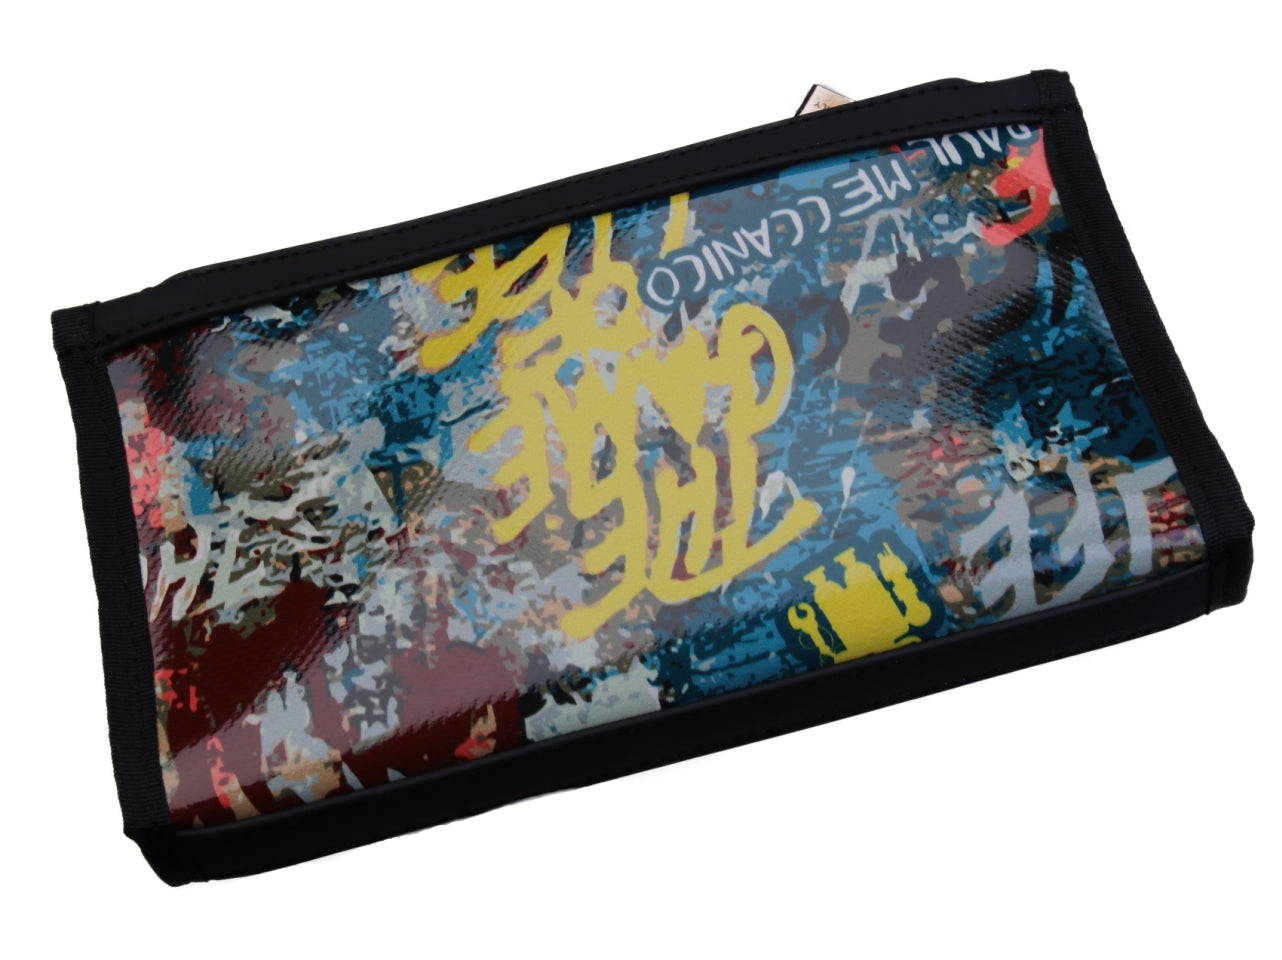 LARGE WOMEN'S WALLET MURALES FANTASY. MODEL PIT MADE OF LORRY TARPAULIN. - Limited Edition Paul Meccanico